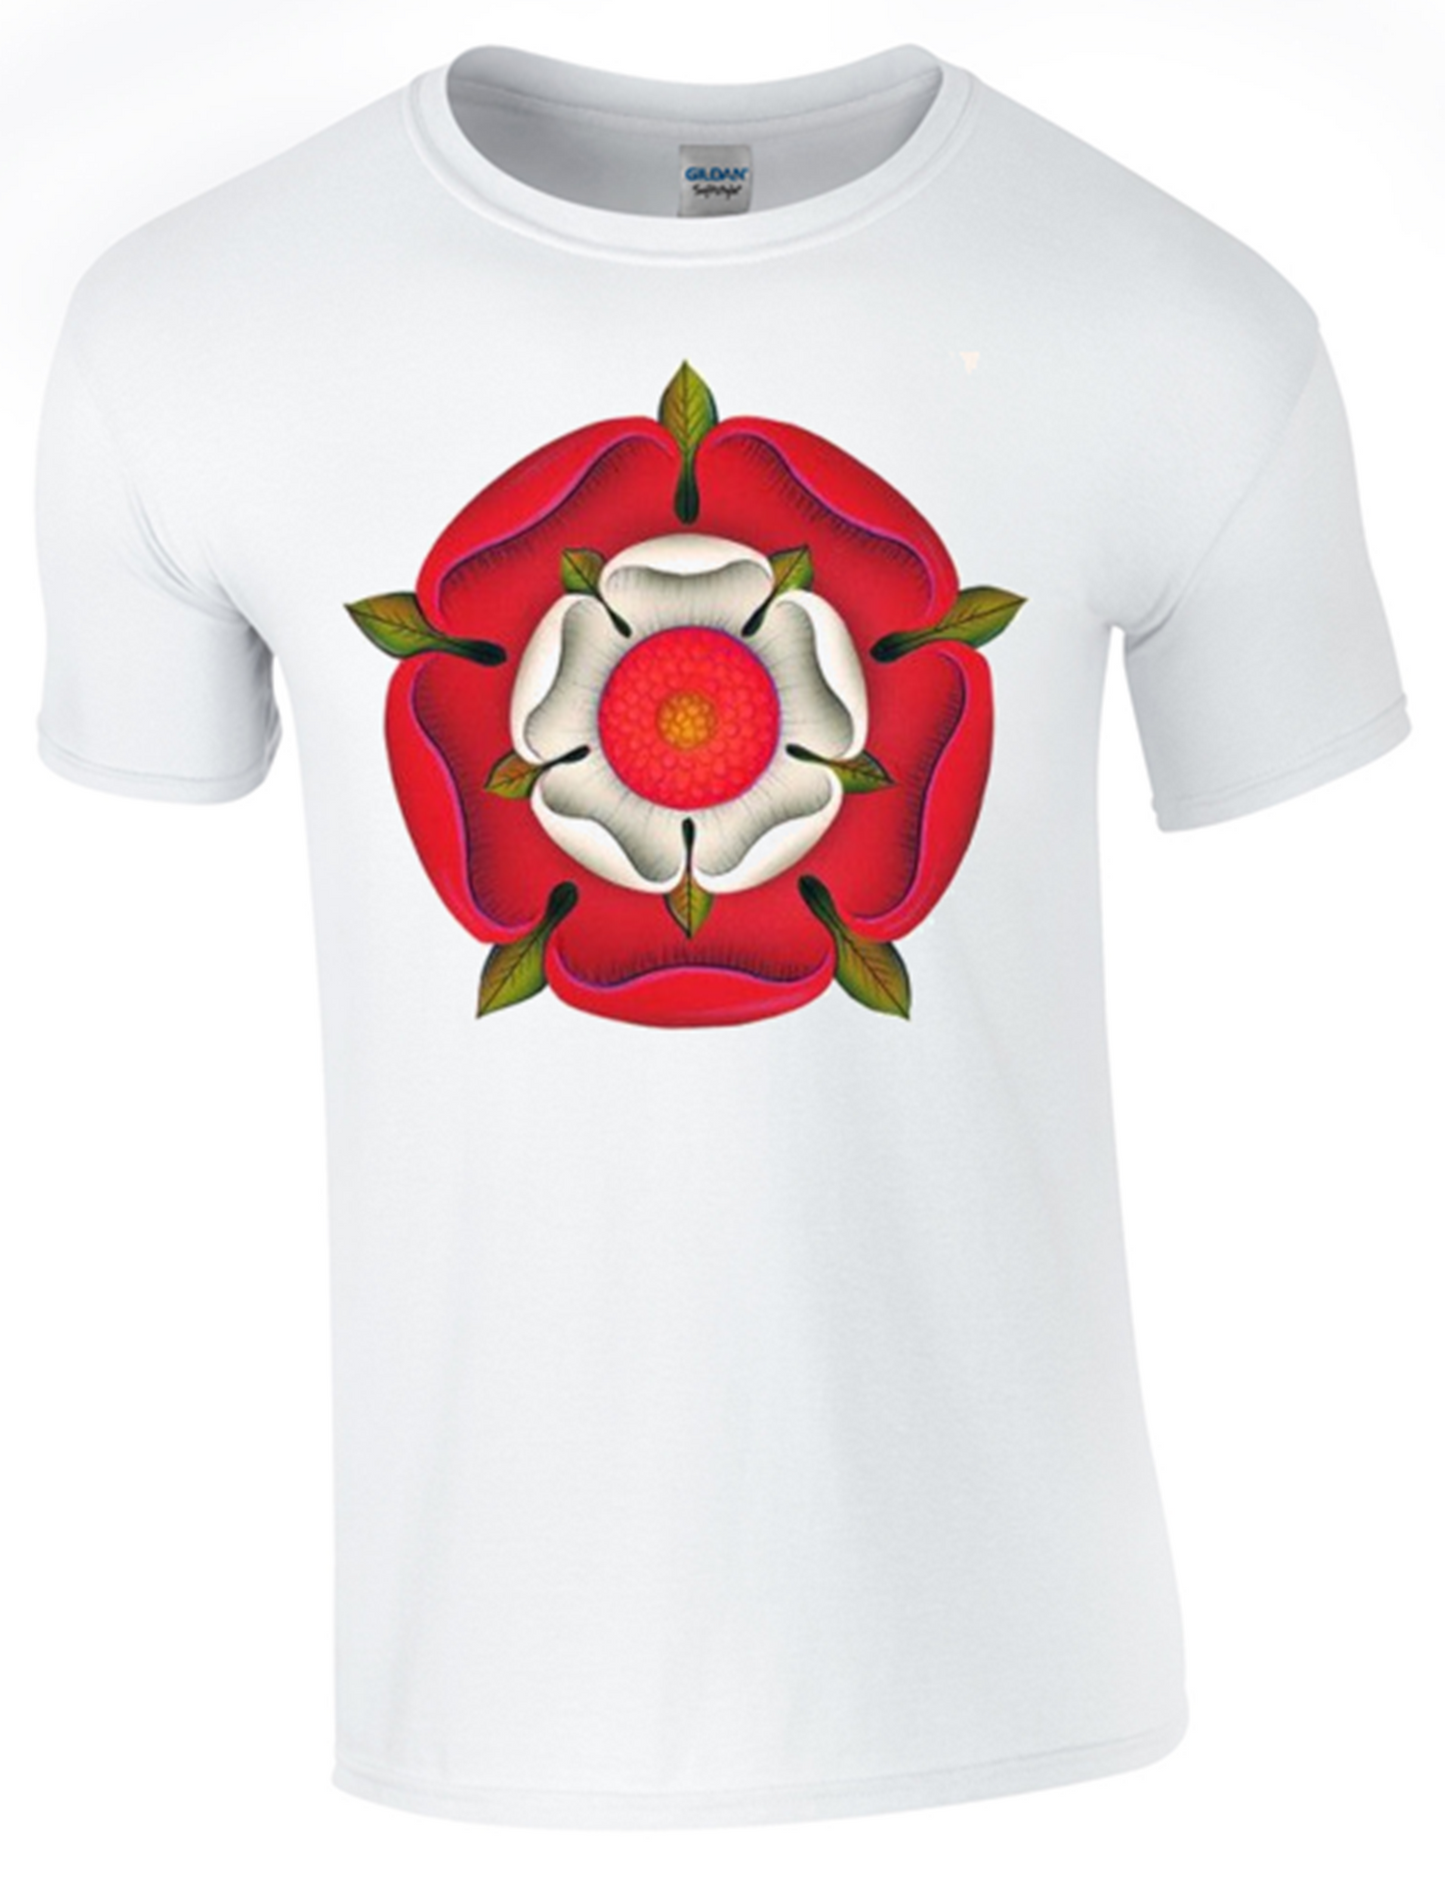 St George's Day English Rose T-Shirt Printed DTG (Direct to Garment) for a Permanent Finish. - Army 1157 kit S / White Army 1157 Kit Veterans Owned Business